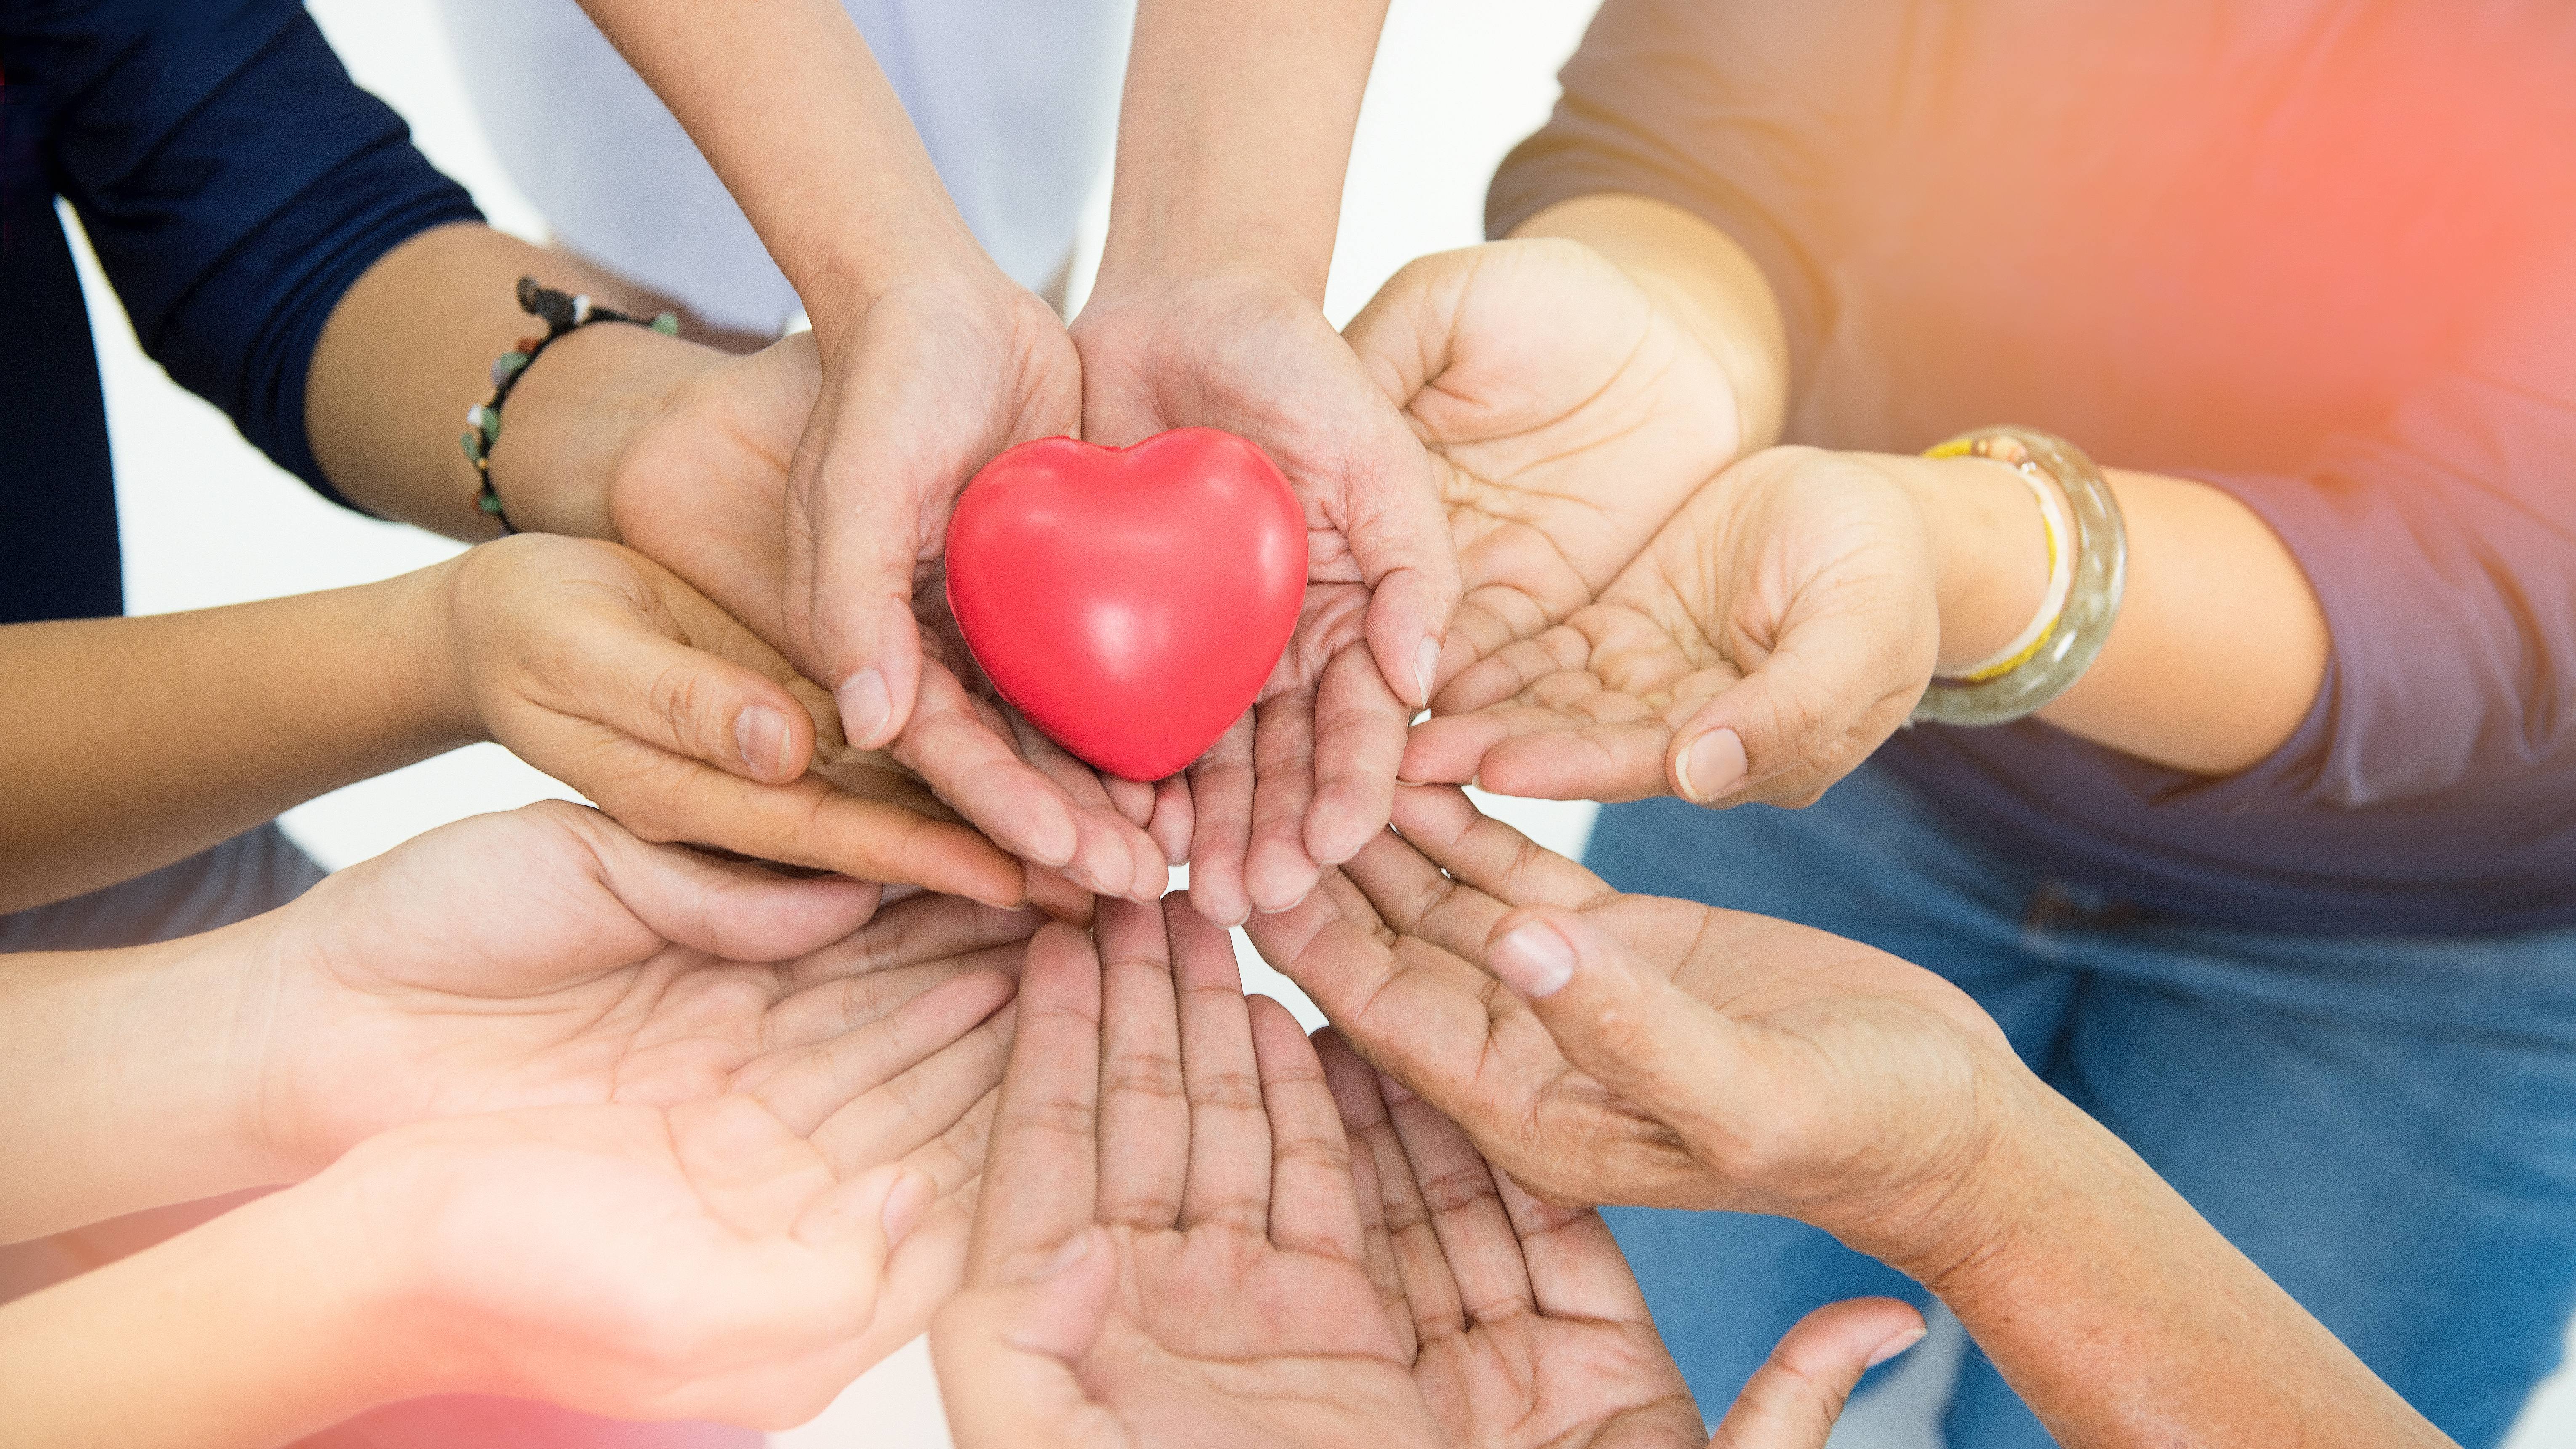 5 tips to love your heart - Mayo Clinic News Network